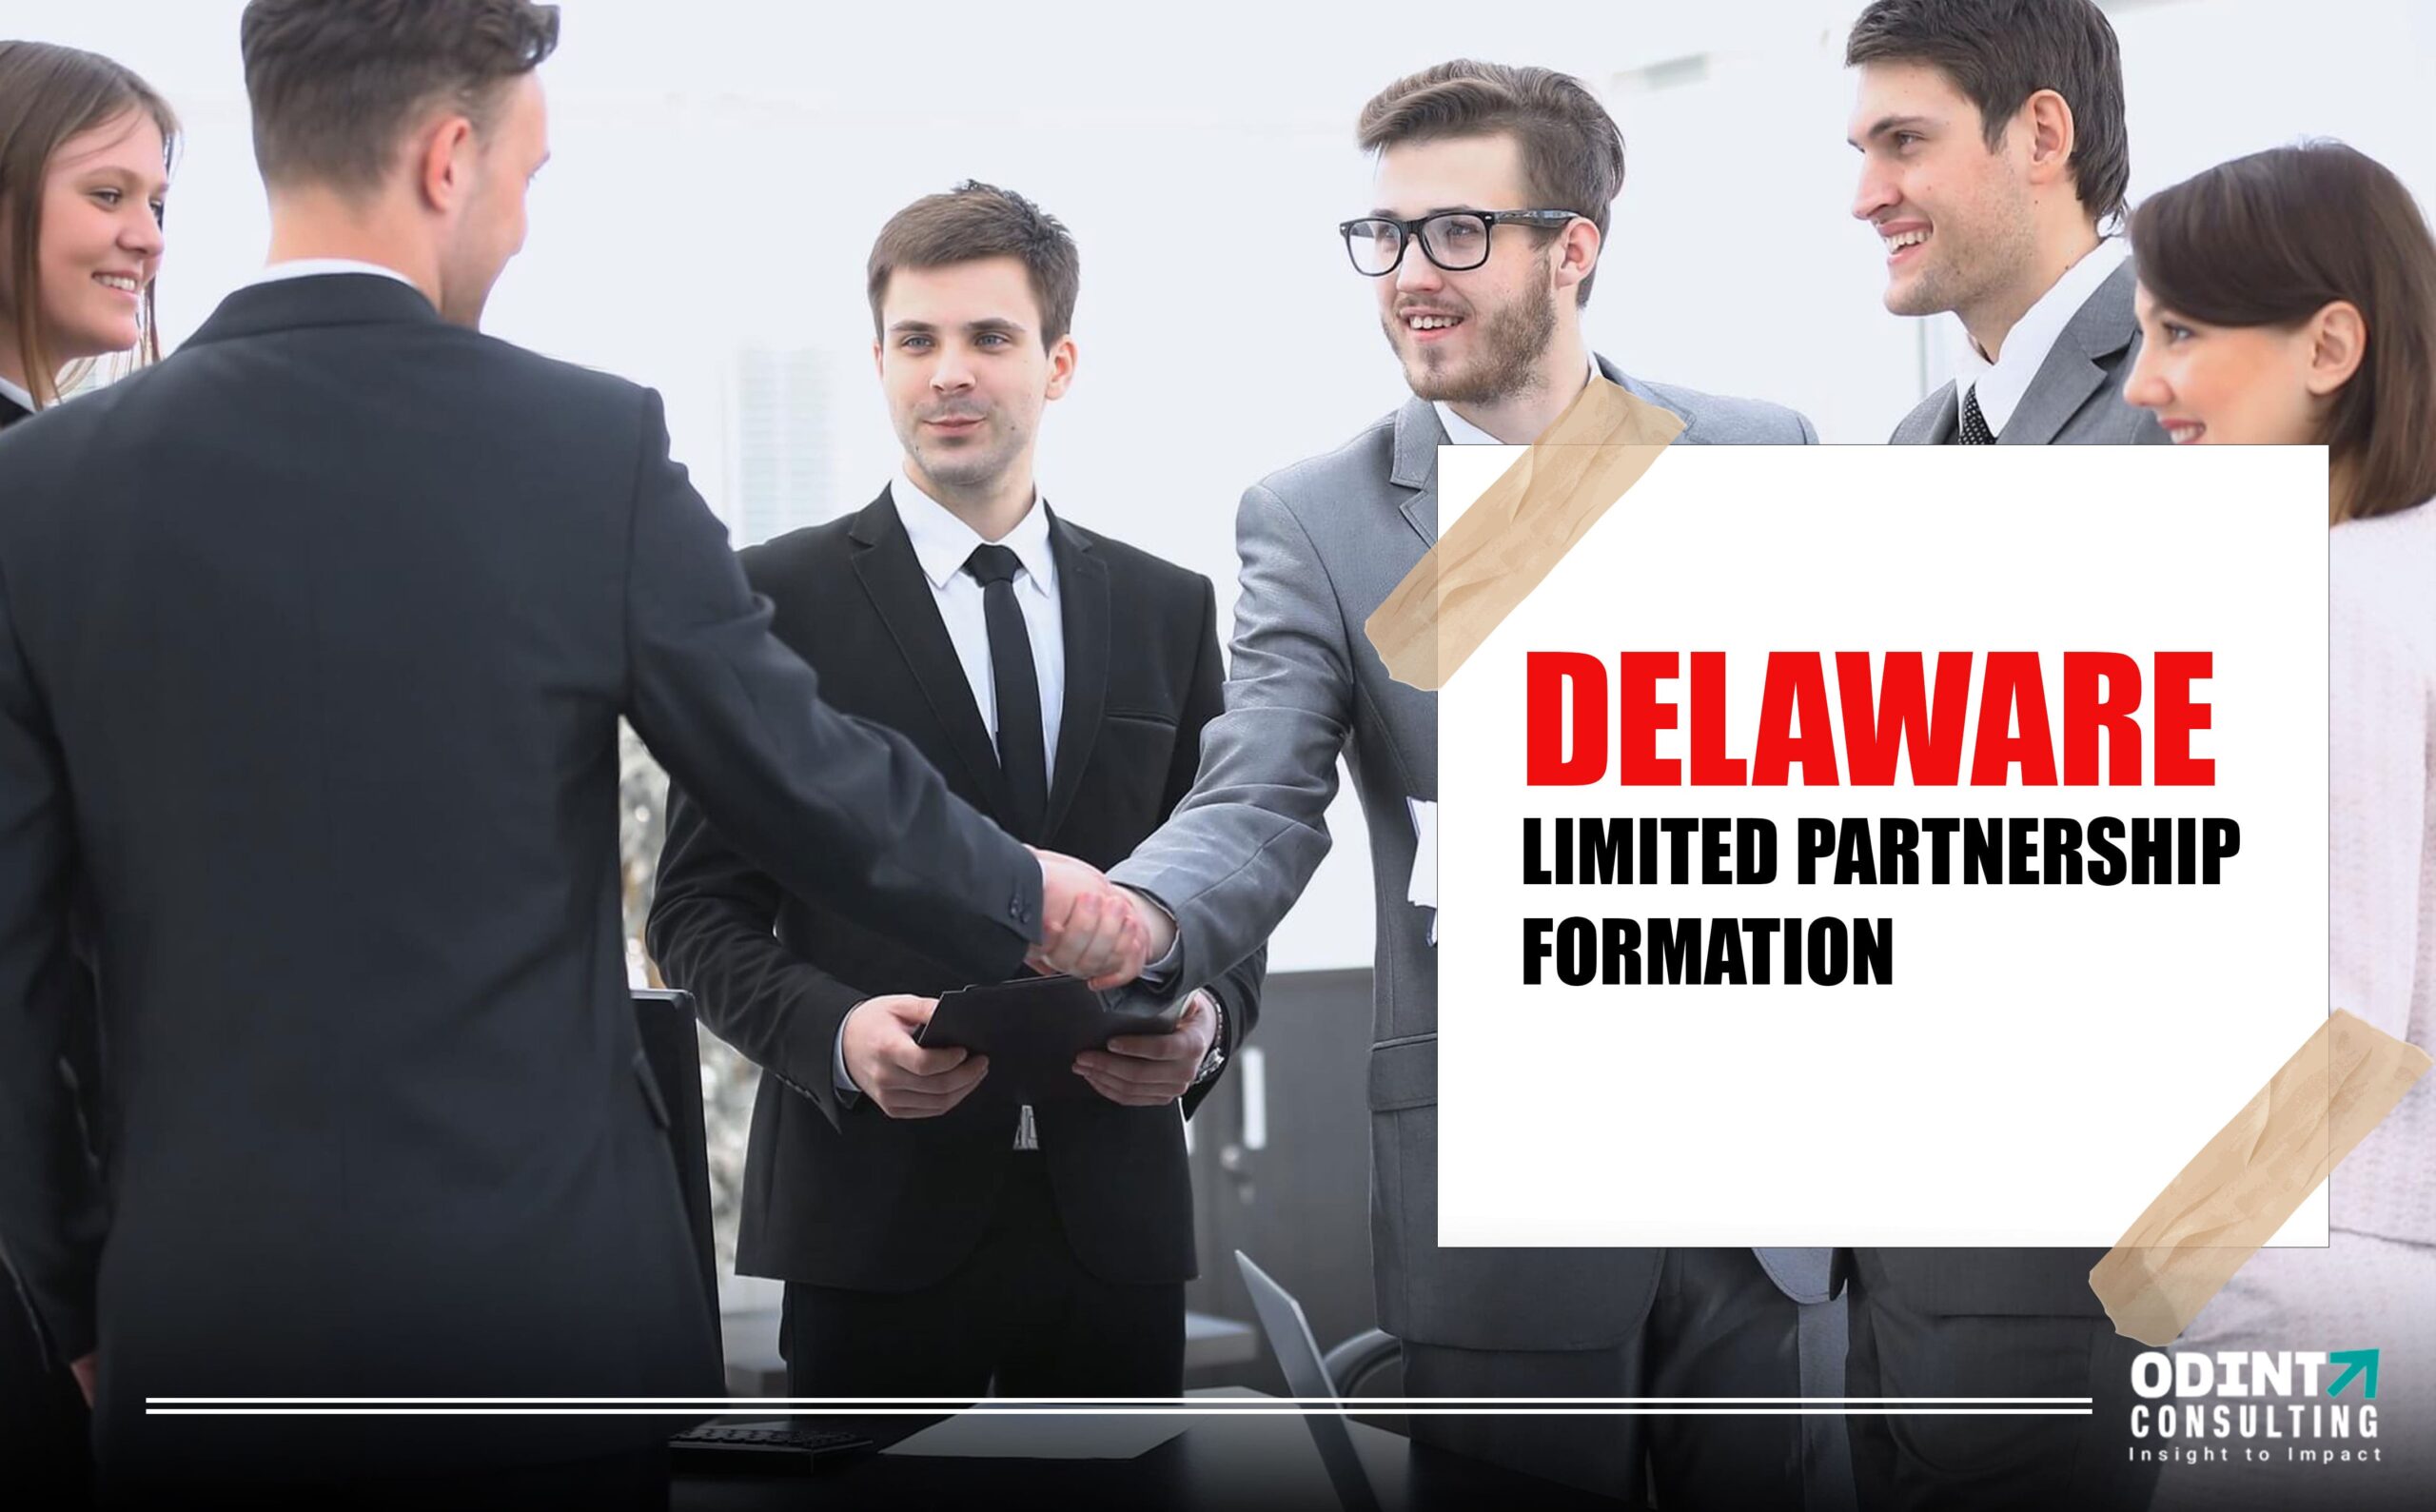 Delaware Limited Partnership Formation: Aim & Steps Mentioned